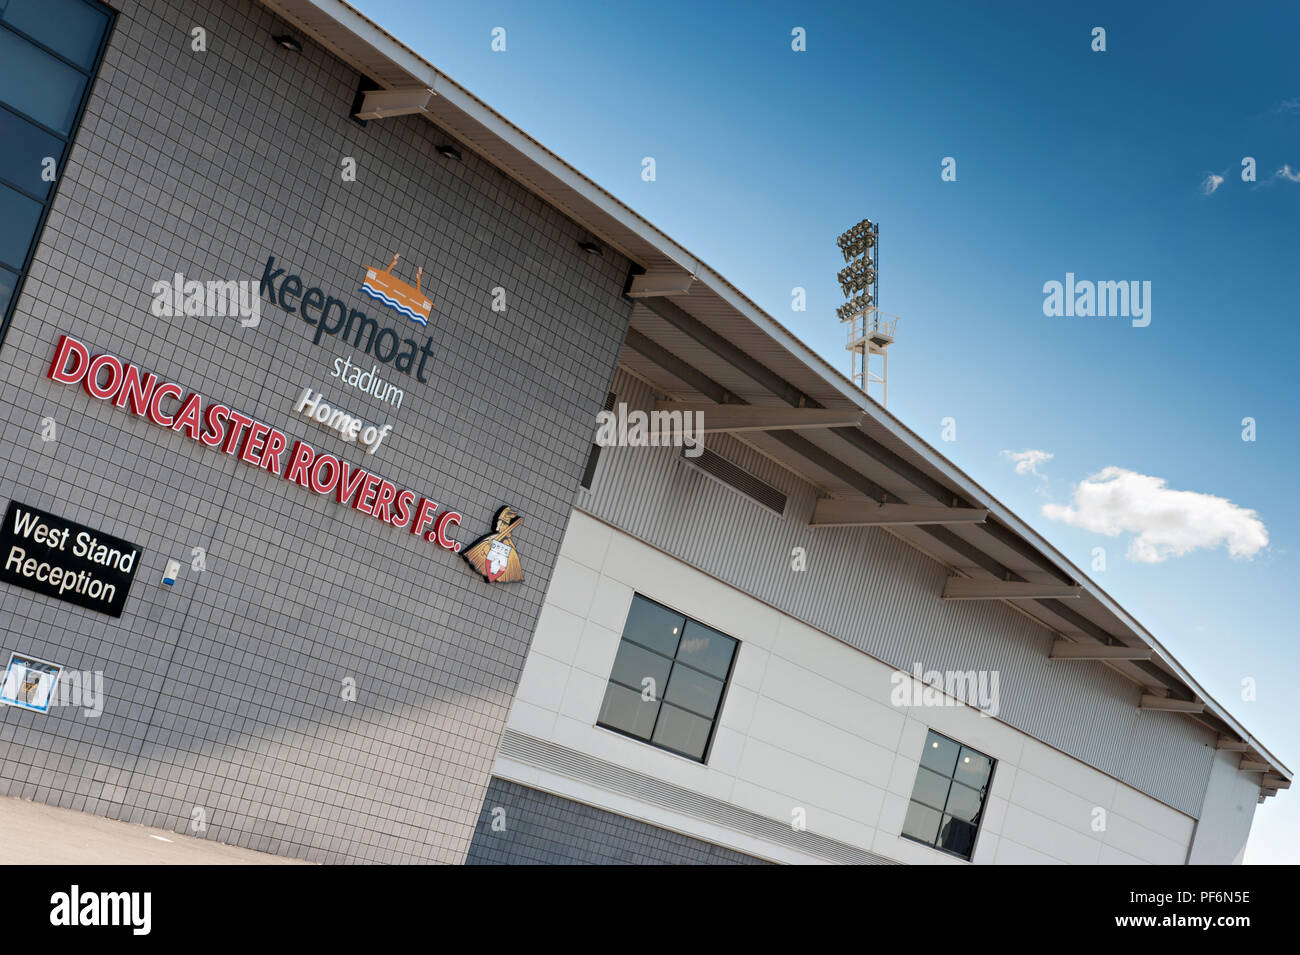 Doncaster Rovers Football Club am Keepmoat Stadion, Doncaster Stockfoto